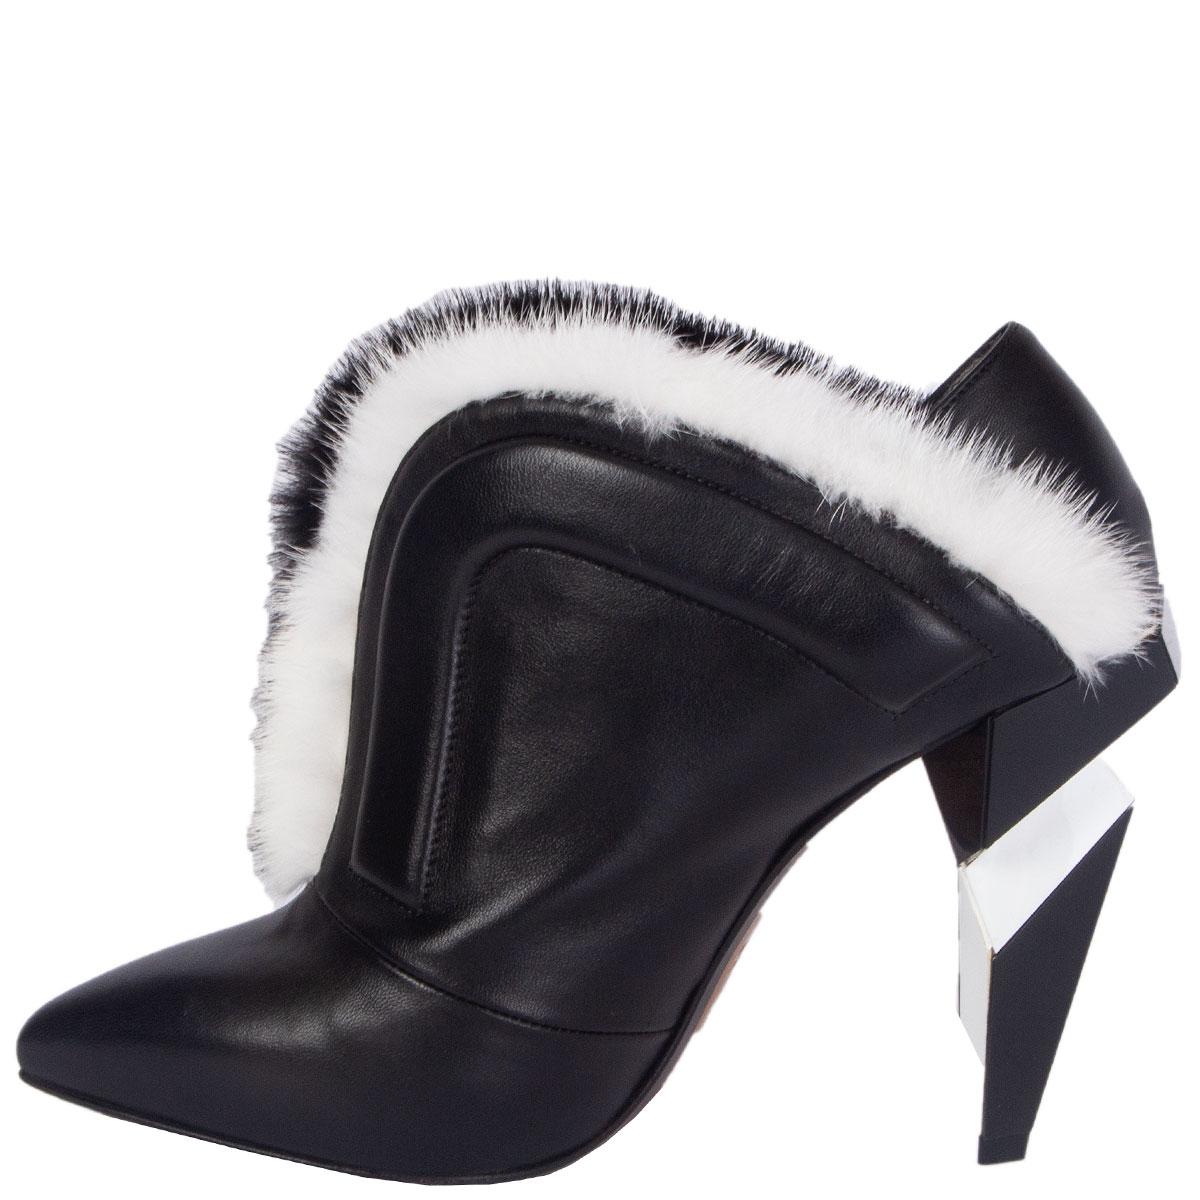 100% authentic Fendi ankle-boots in black smooth nappa leather with black and white fur trim. Features a black and white geometrical pvc heel. Has a very faint dent in the left heel. Brand new. Come with dust bag. 

Measurements
Imprinted